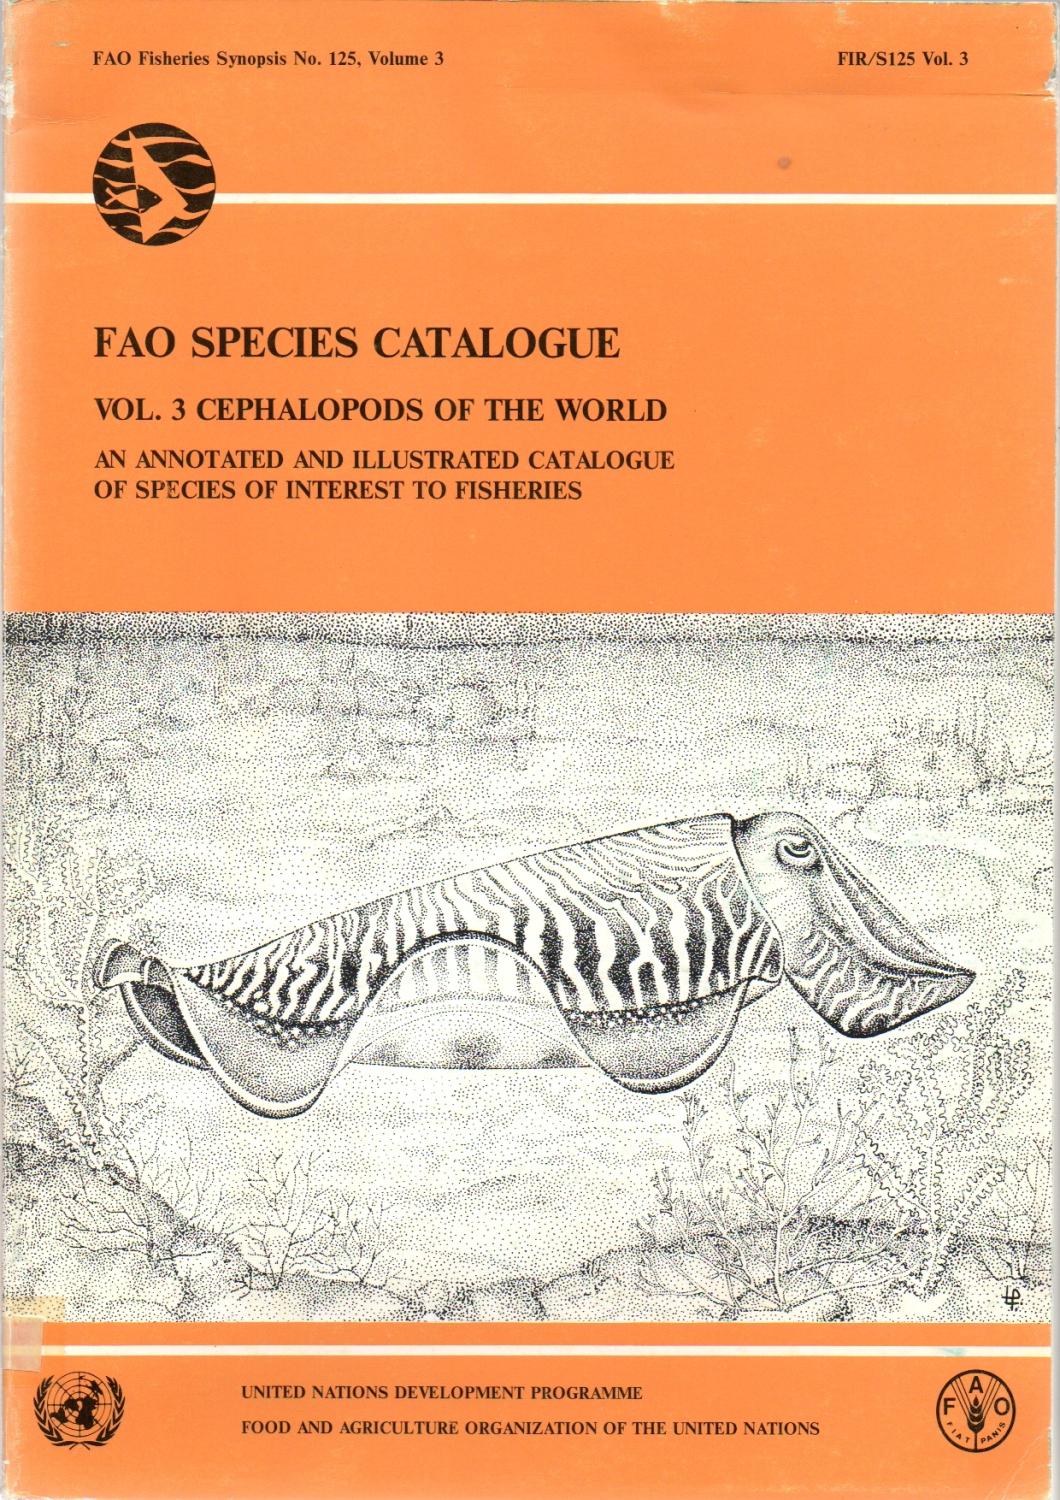 Cephalopods of the World: an Annotated and Illustrated Catalogue of Species of Interest to Fisheries (FAO Species Catalogue Vol. 3) - Roper, Clyde F.E.; Sweeney, Michael J.; Nauen, Cornelia E.